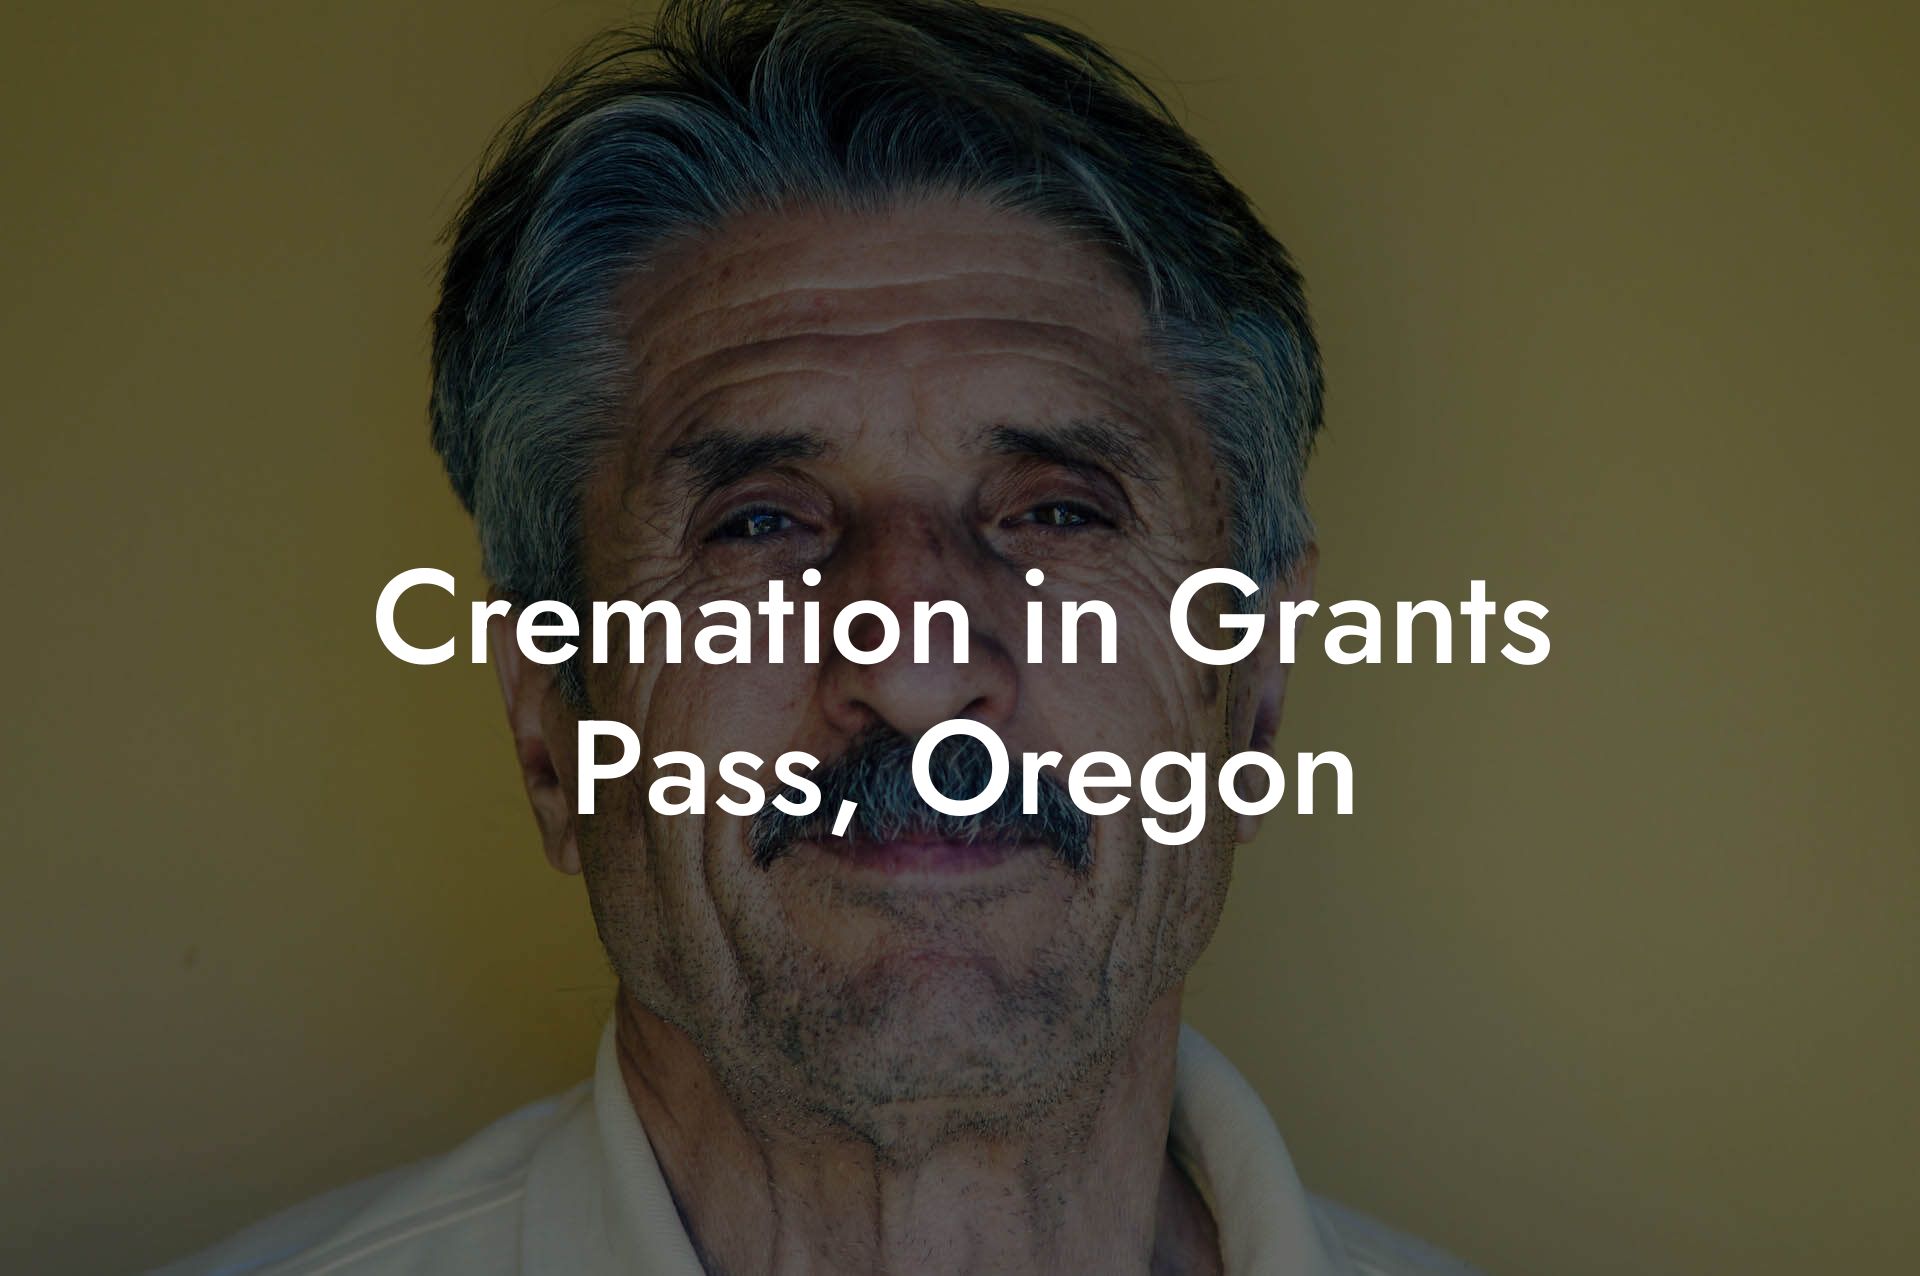 Cremation in Grants Pass, Oregon